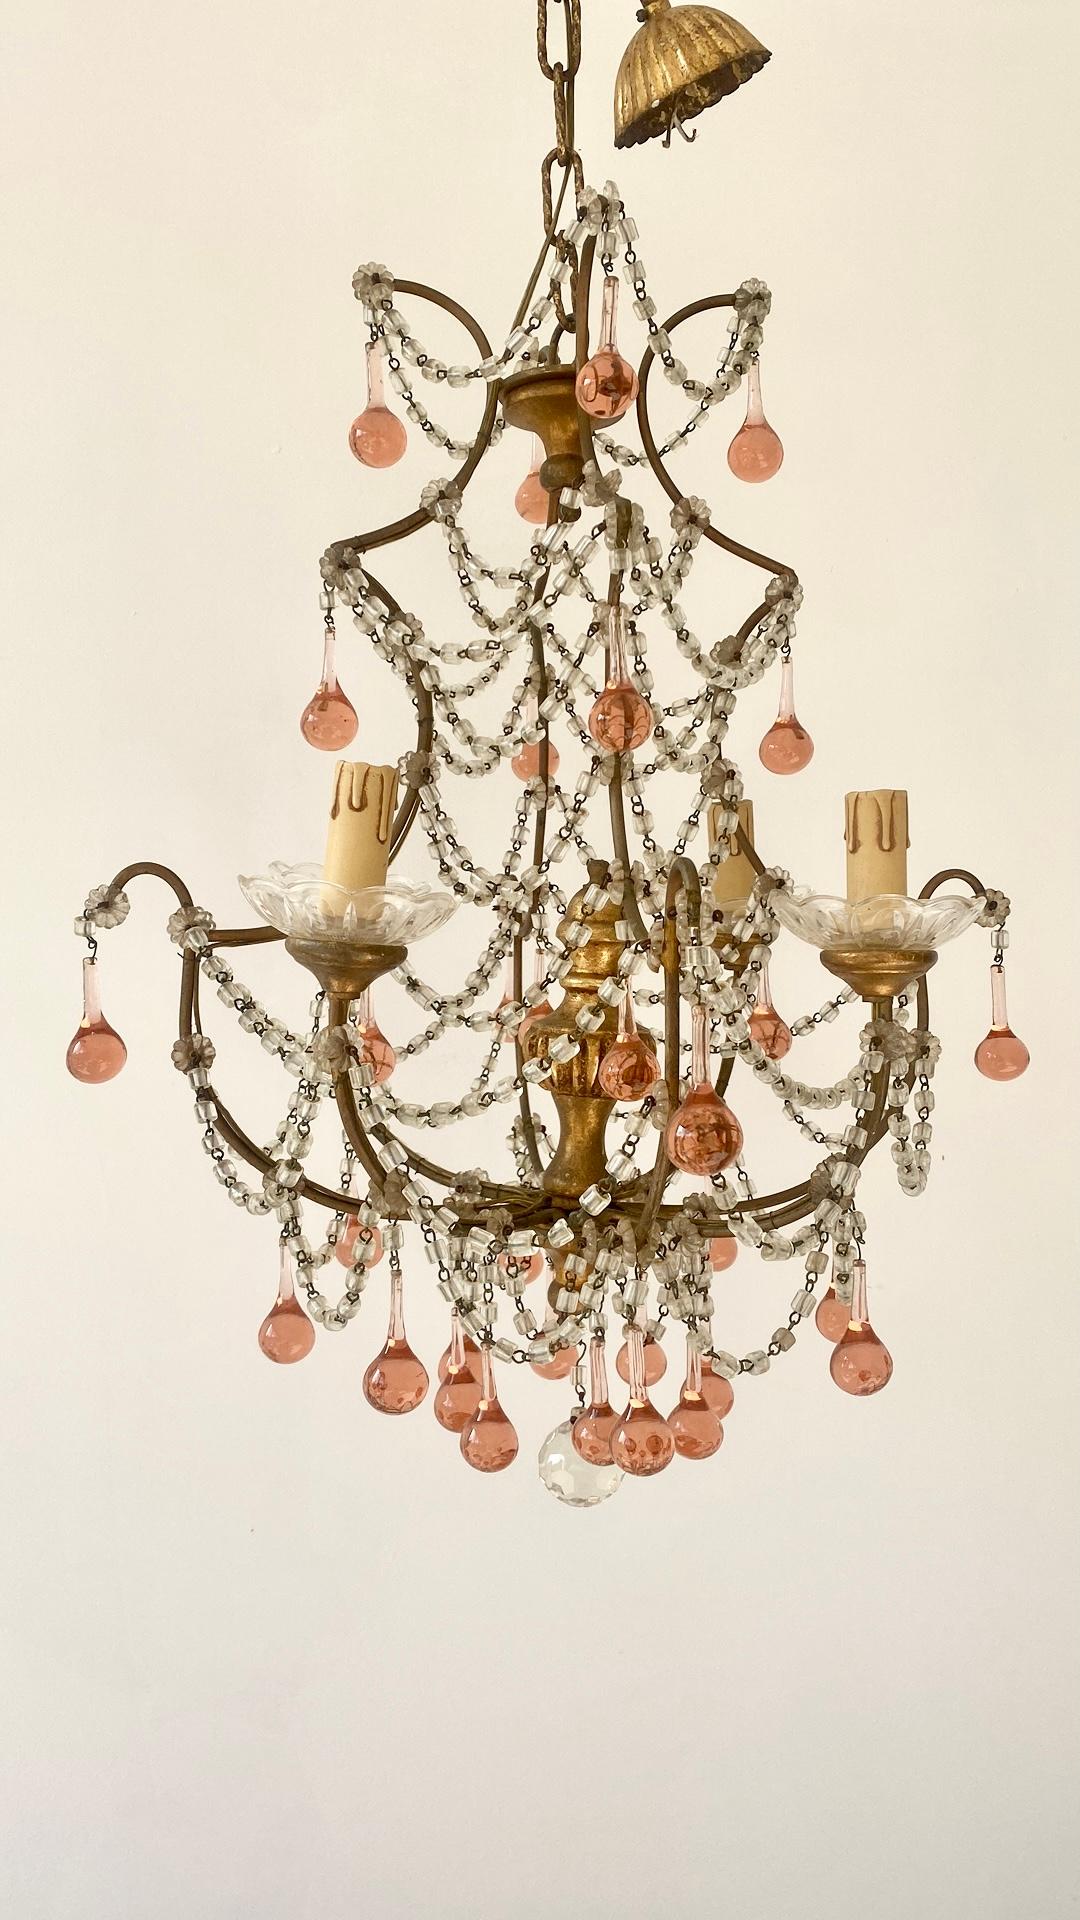 A very pretty gilded birdcage chandelier with 4 lamps.

Finished with pink droplets and swathed all over with the original glass necklaces.

Measures 58cm from top of light to bottom crystal, comes with original chain and ceiling rose (38cm in